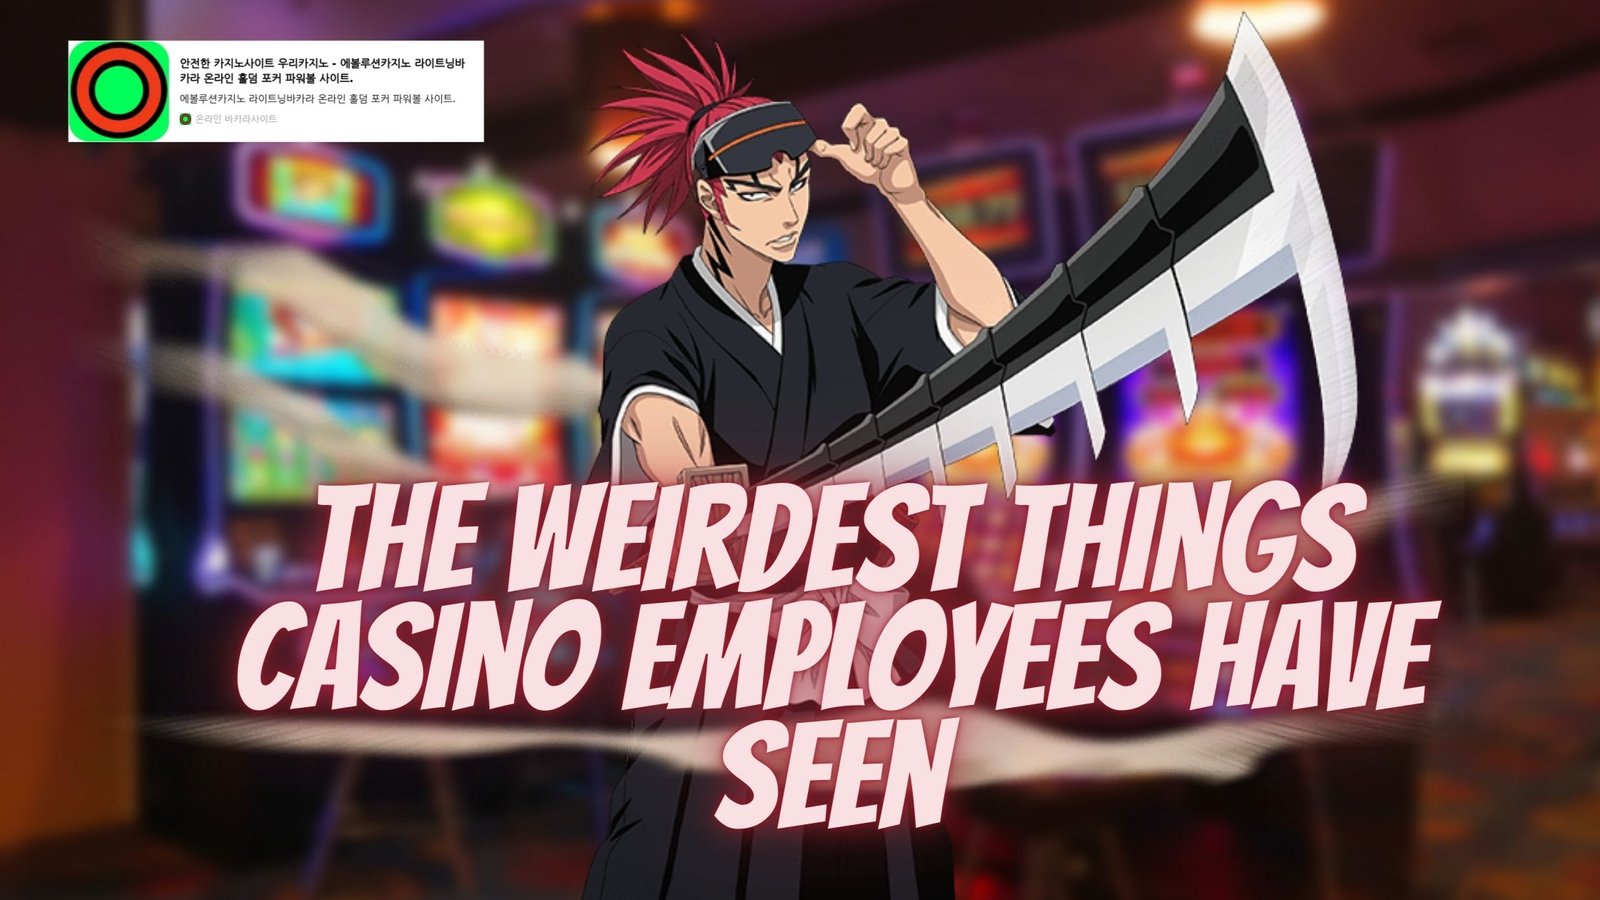 The Weirdest Things Casino Employees Have Seen